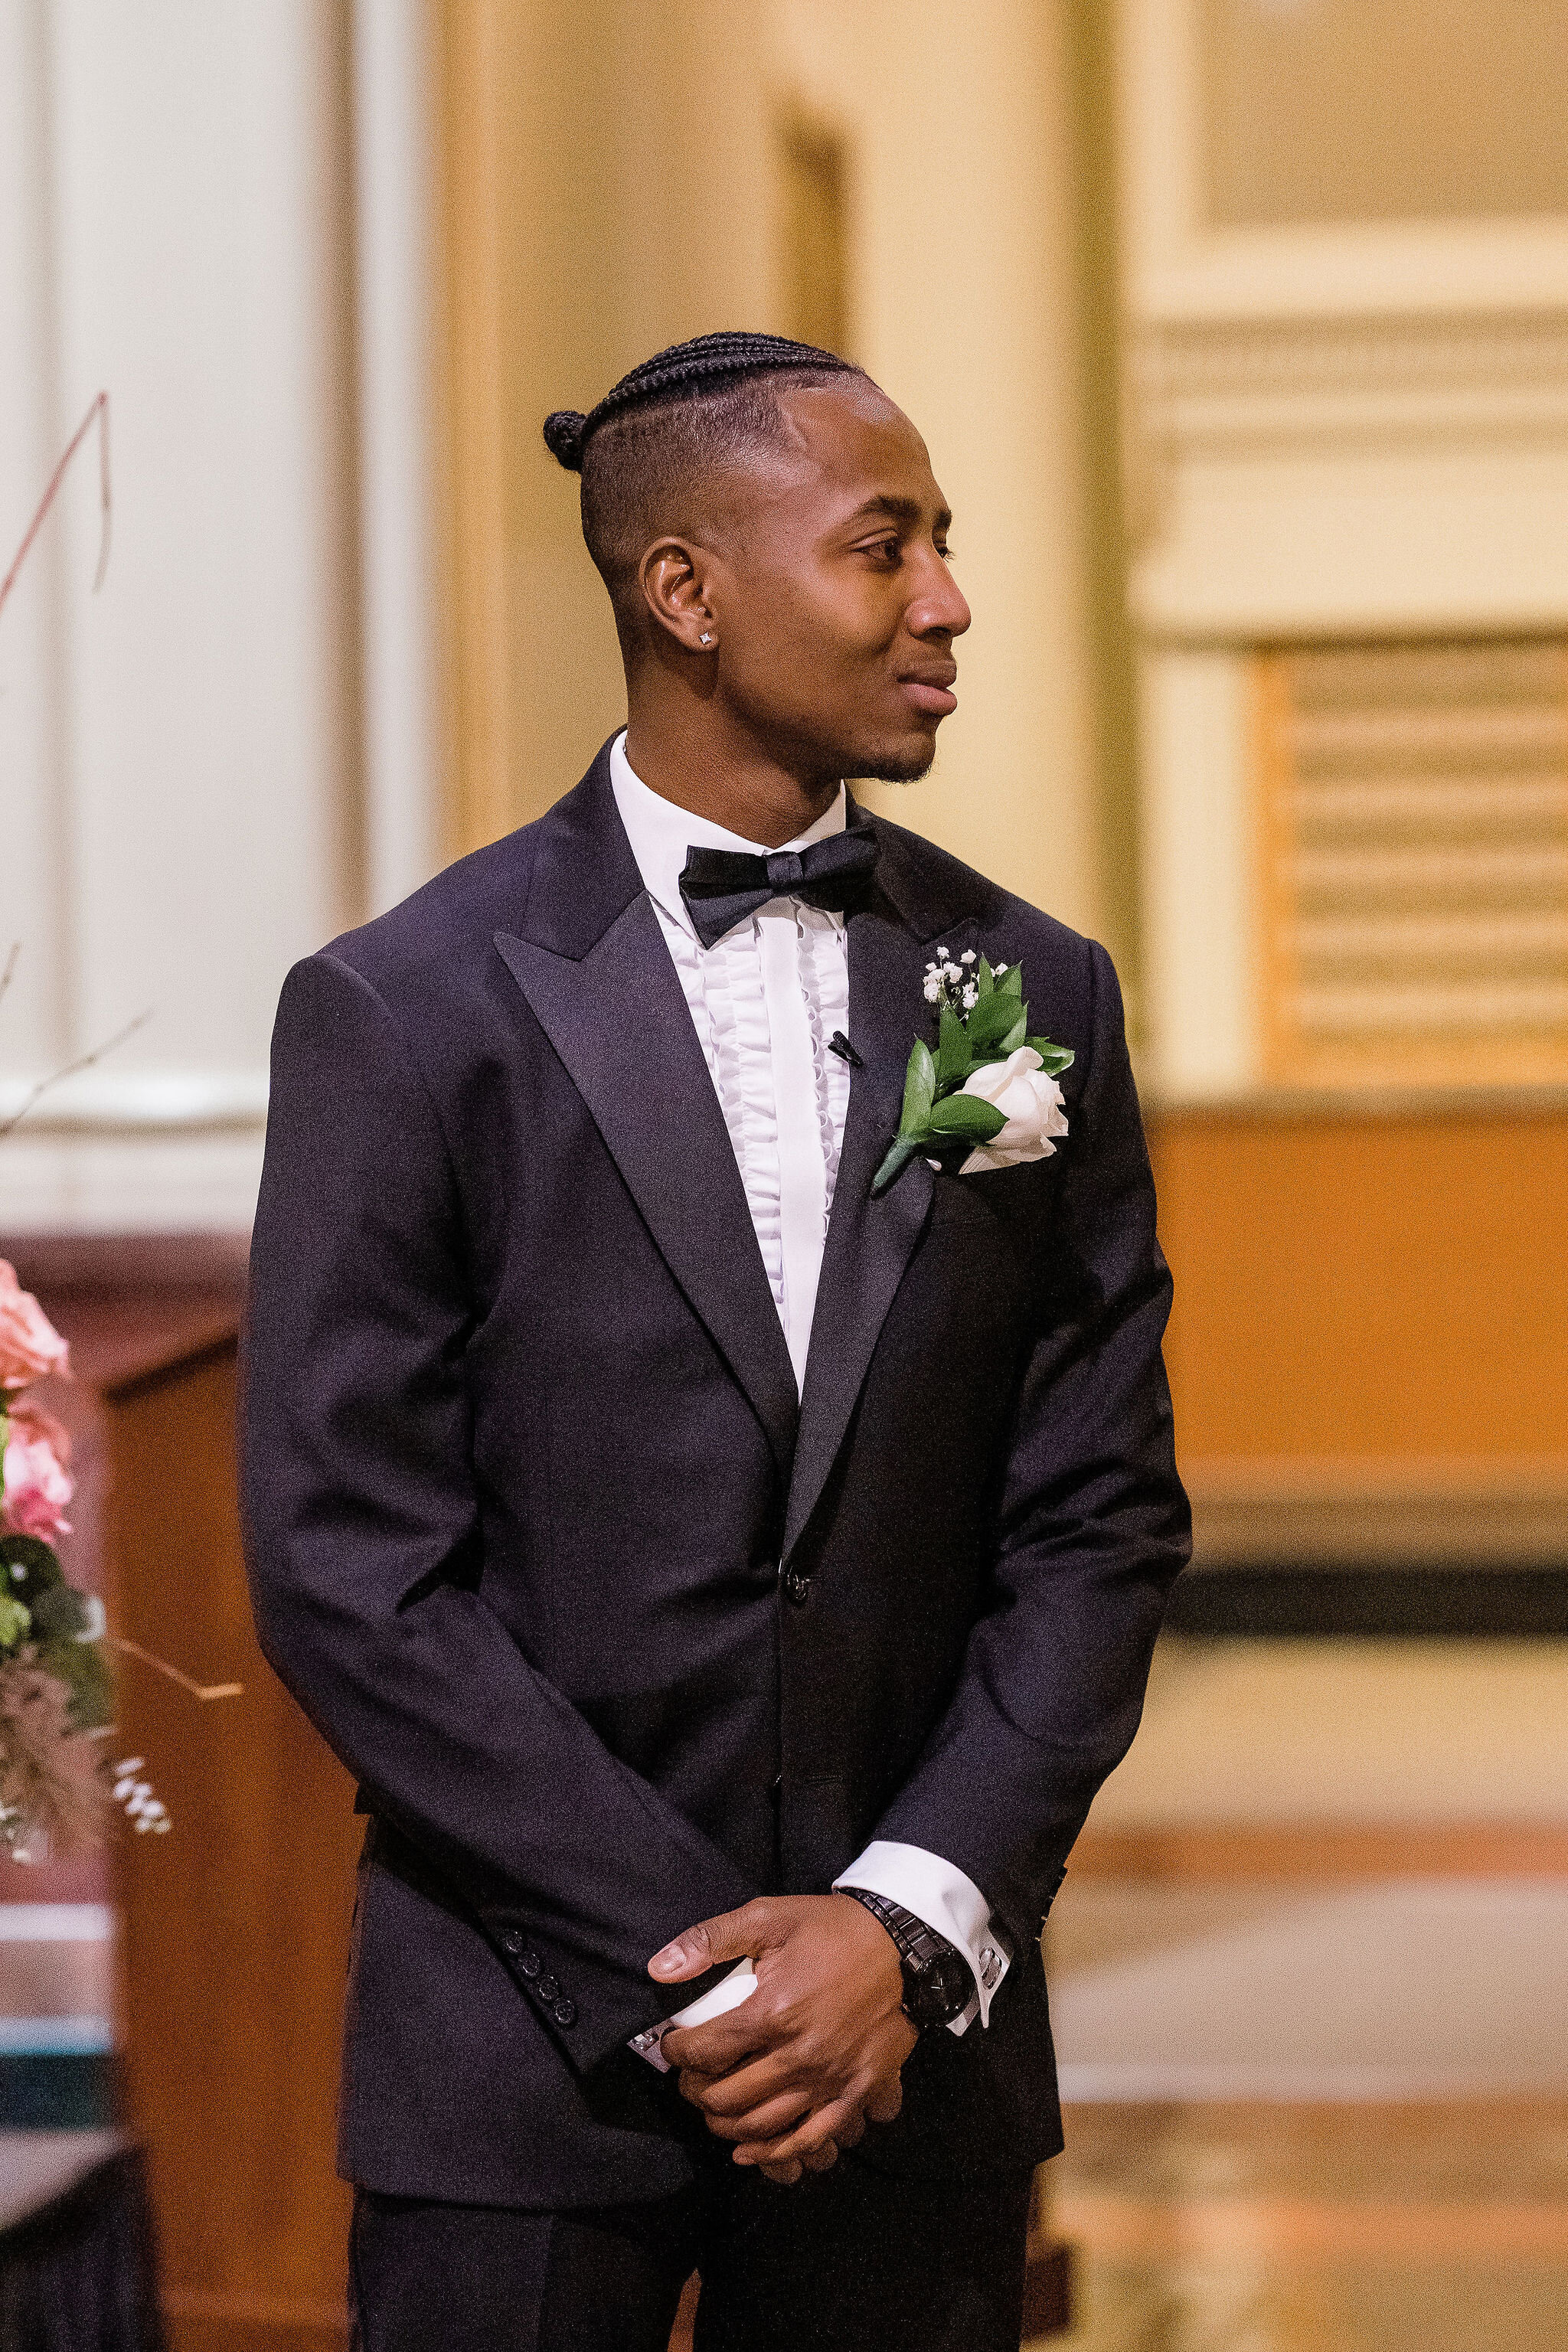 Groom waiting for bride to walk down the aisle